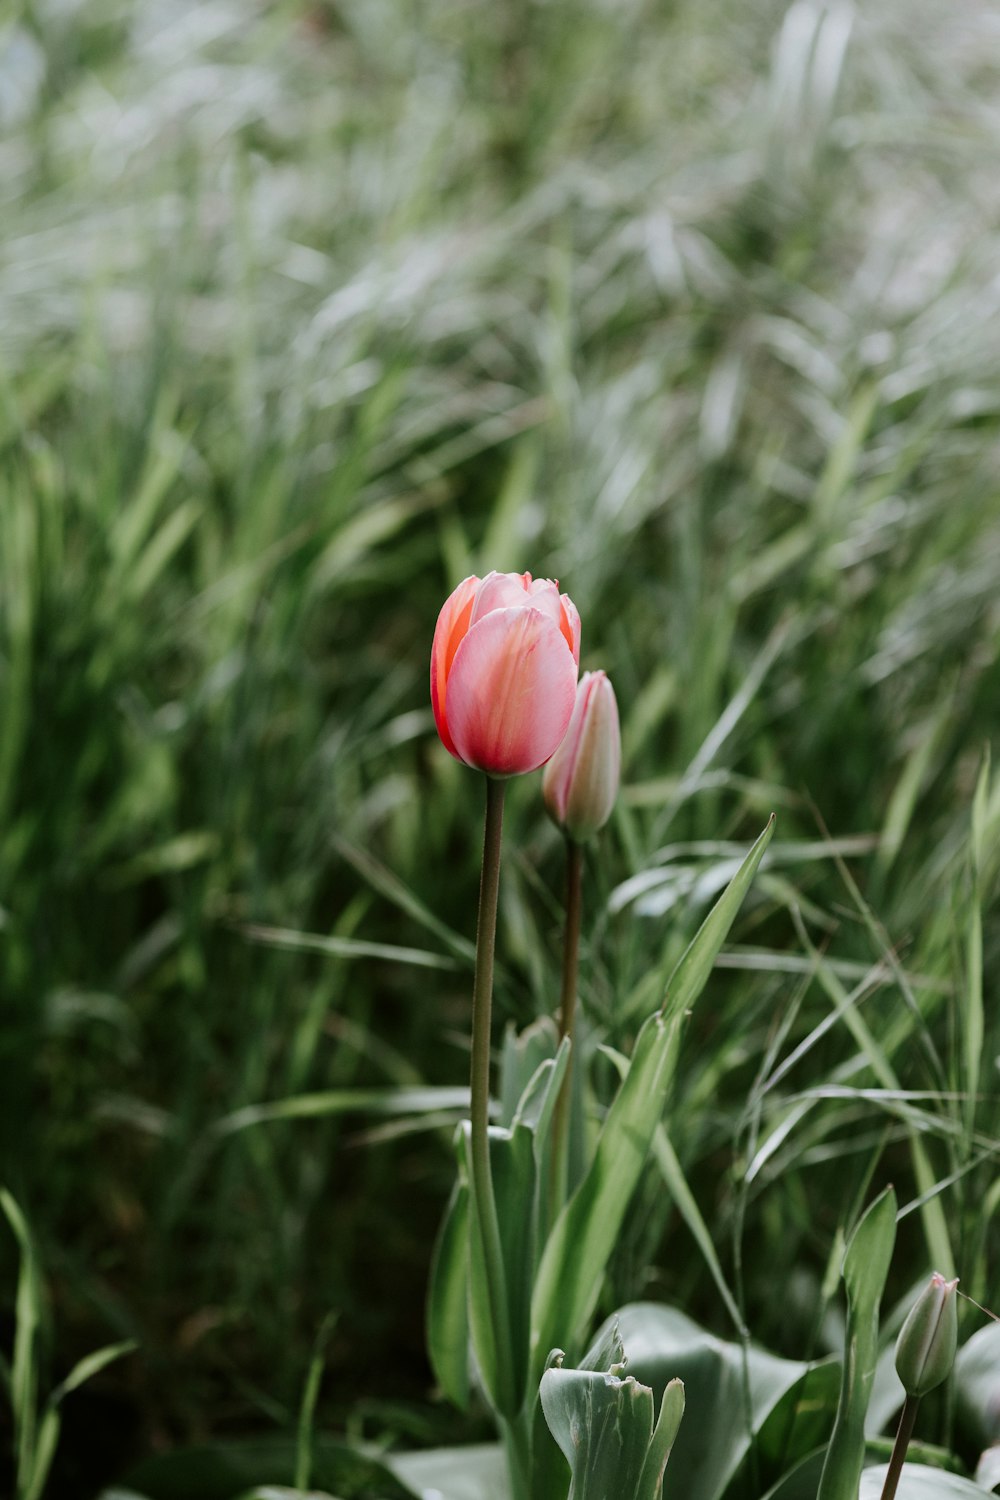 a single pink tulip in a field of tall grass